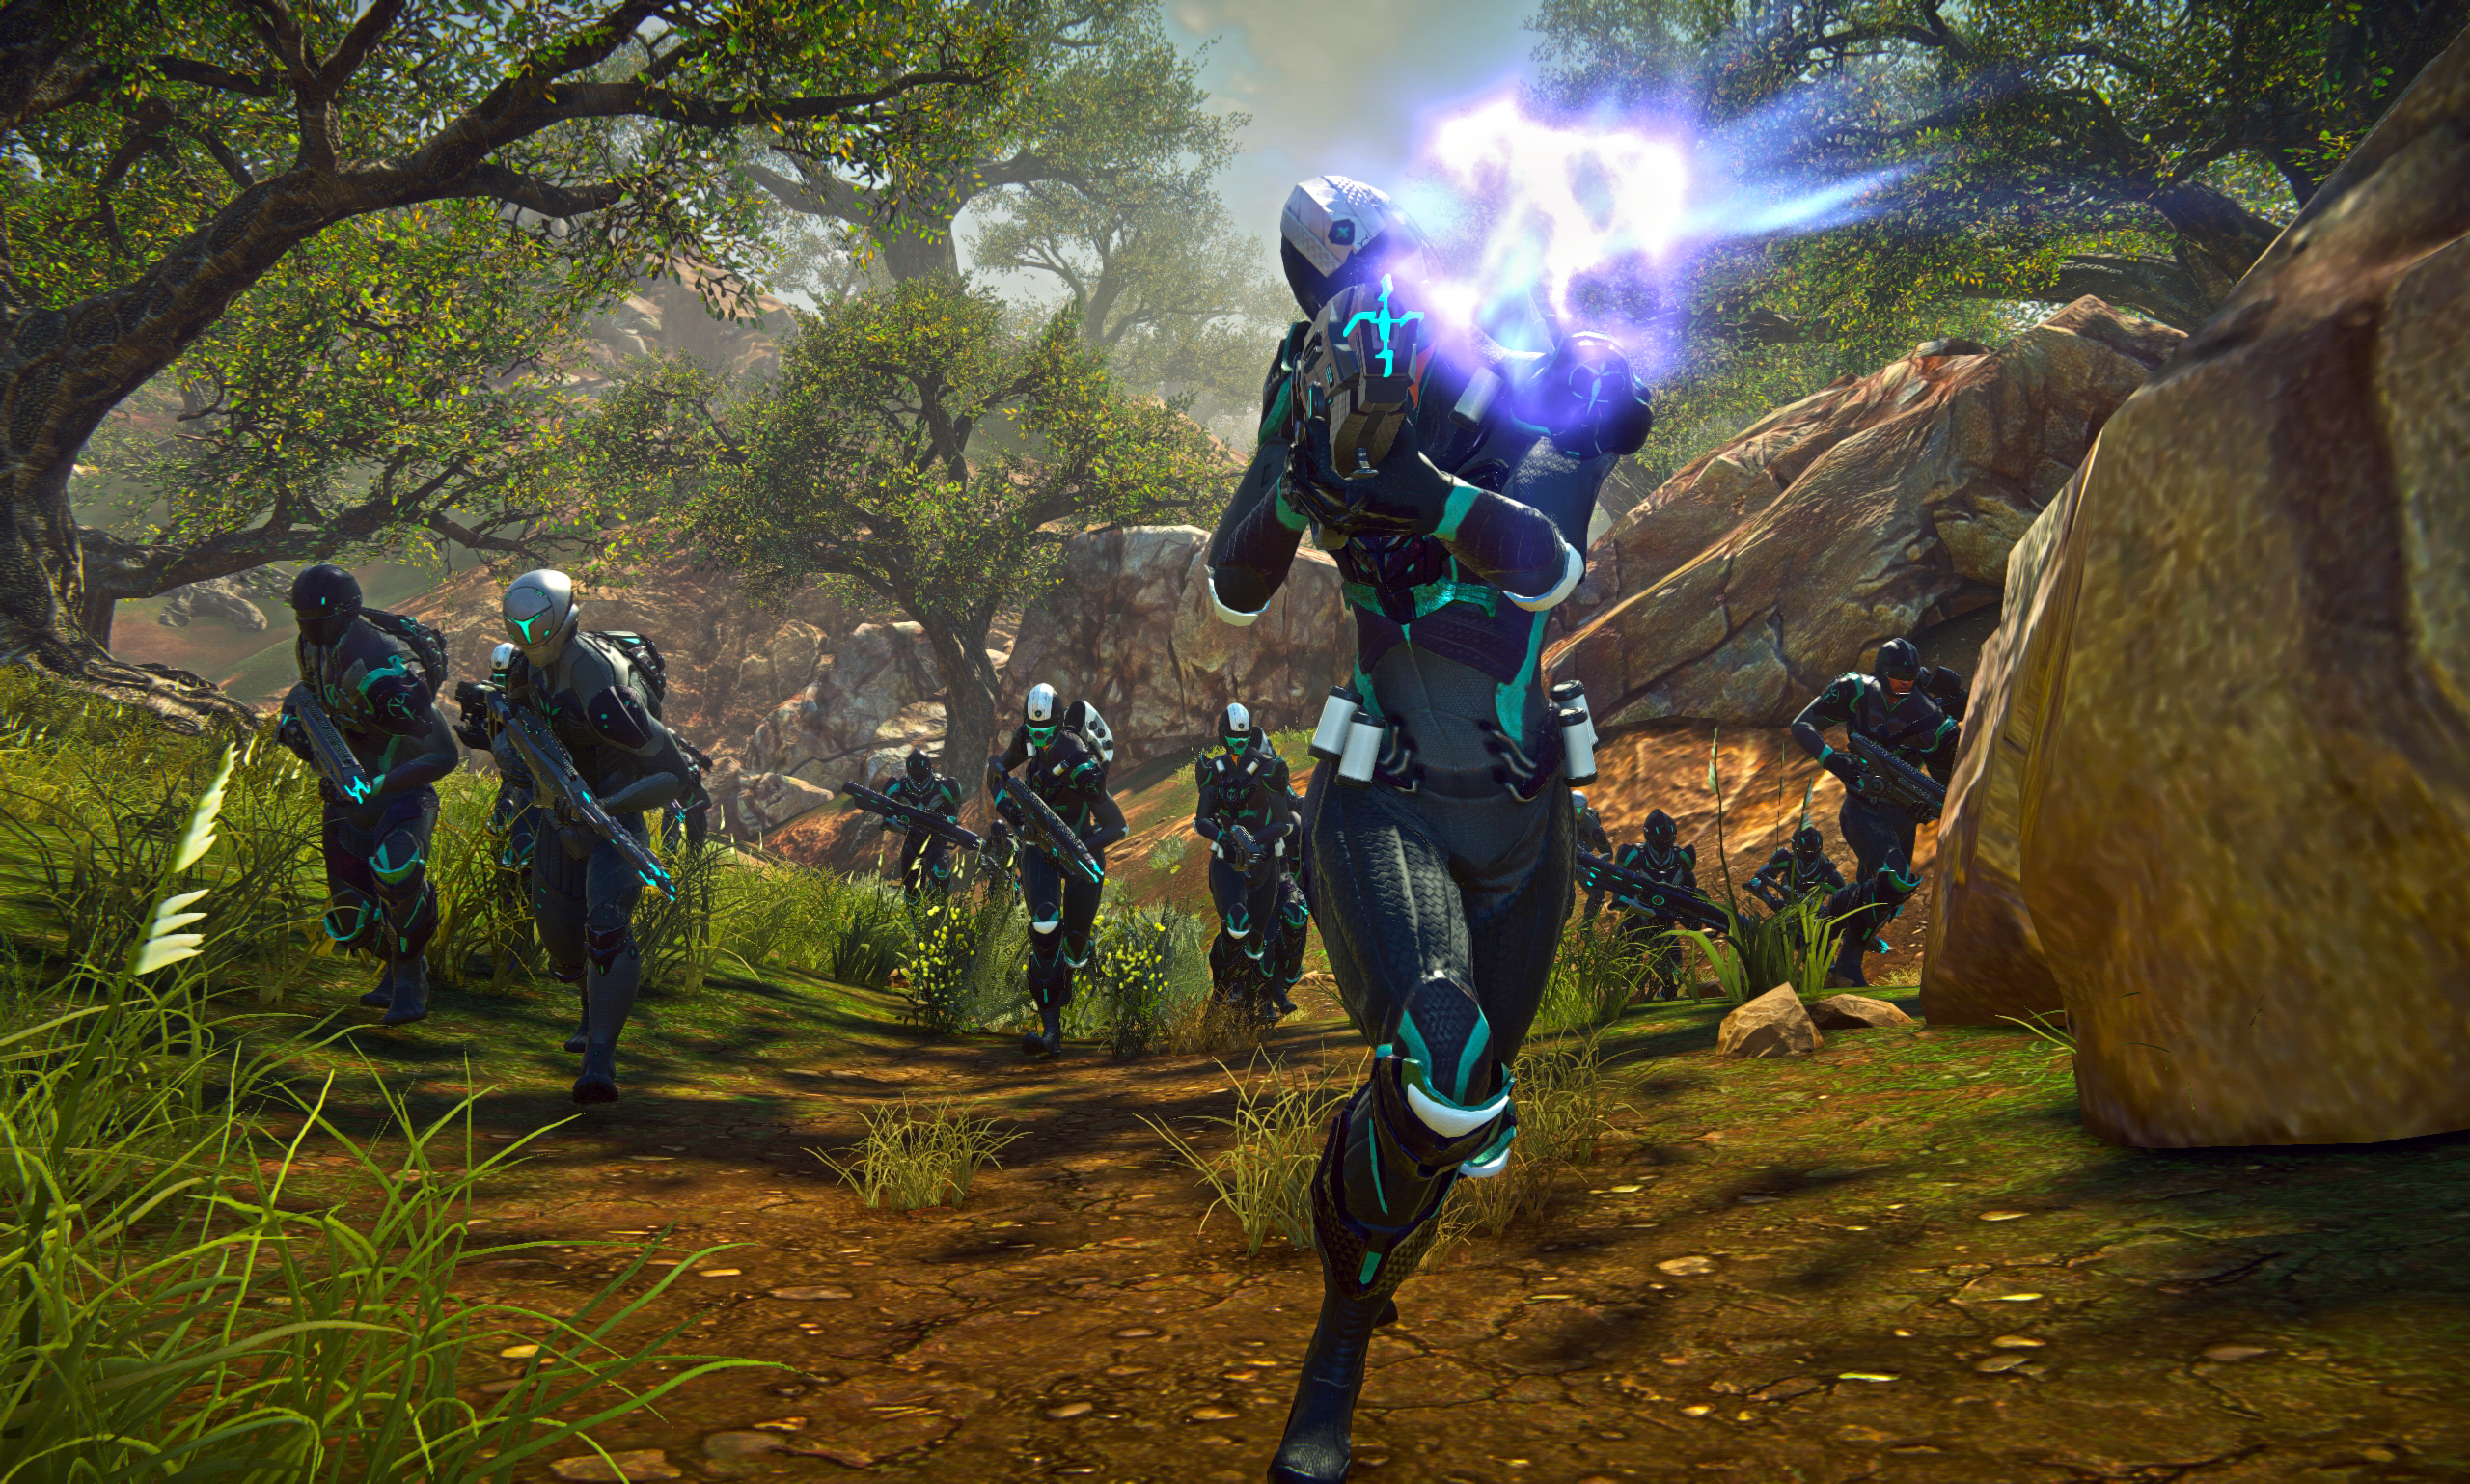 Best MMOs: Planetside 2 - Several characters with guns run through a forest.